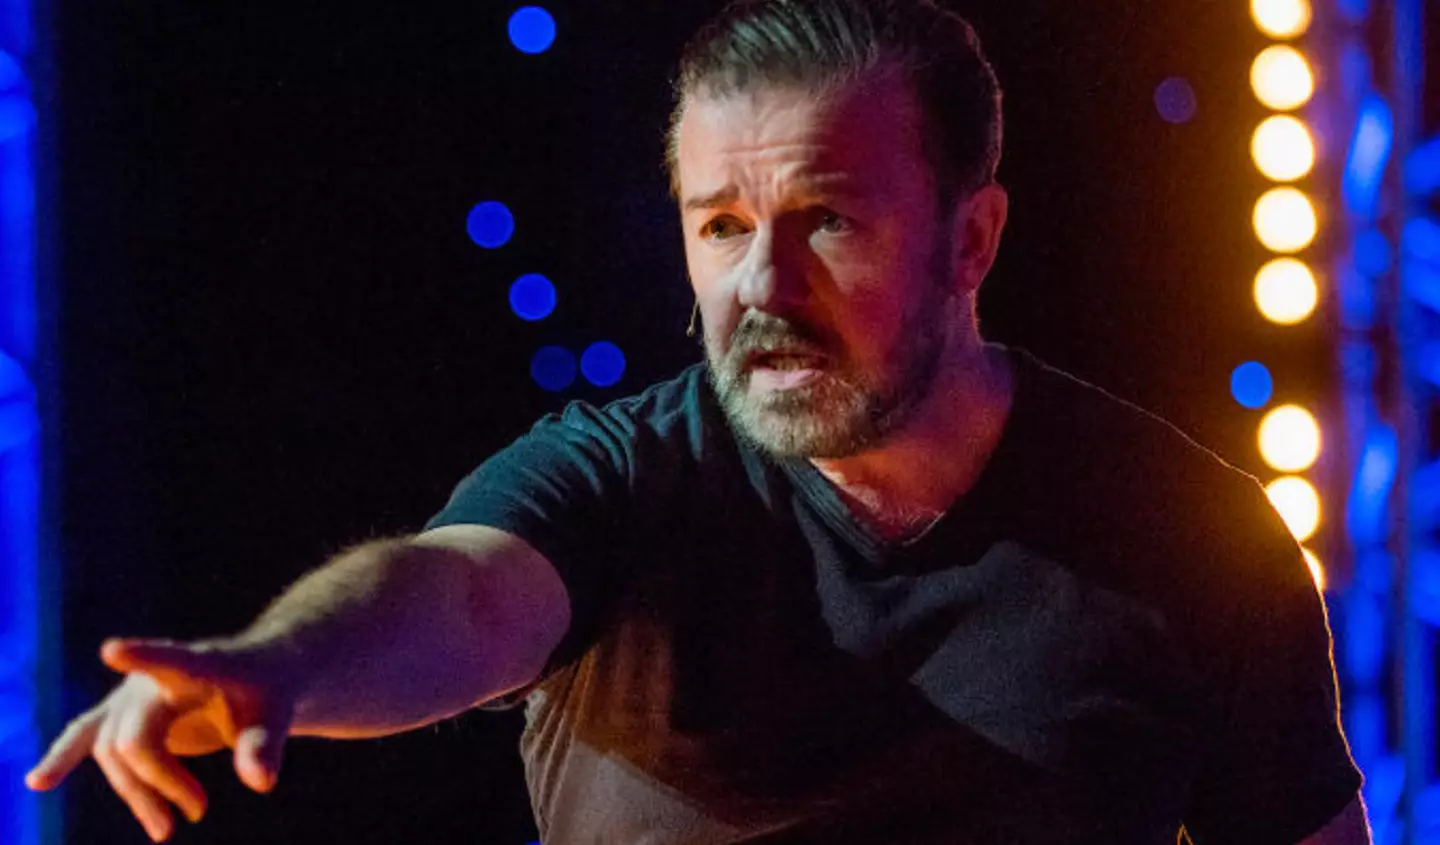 Ricky Gervais made some controversial jokes aimed at the transgender community in his latest stand-up comedy show.